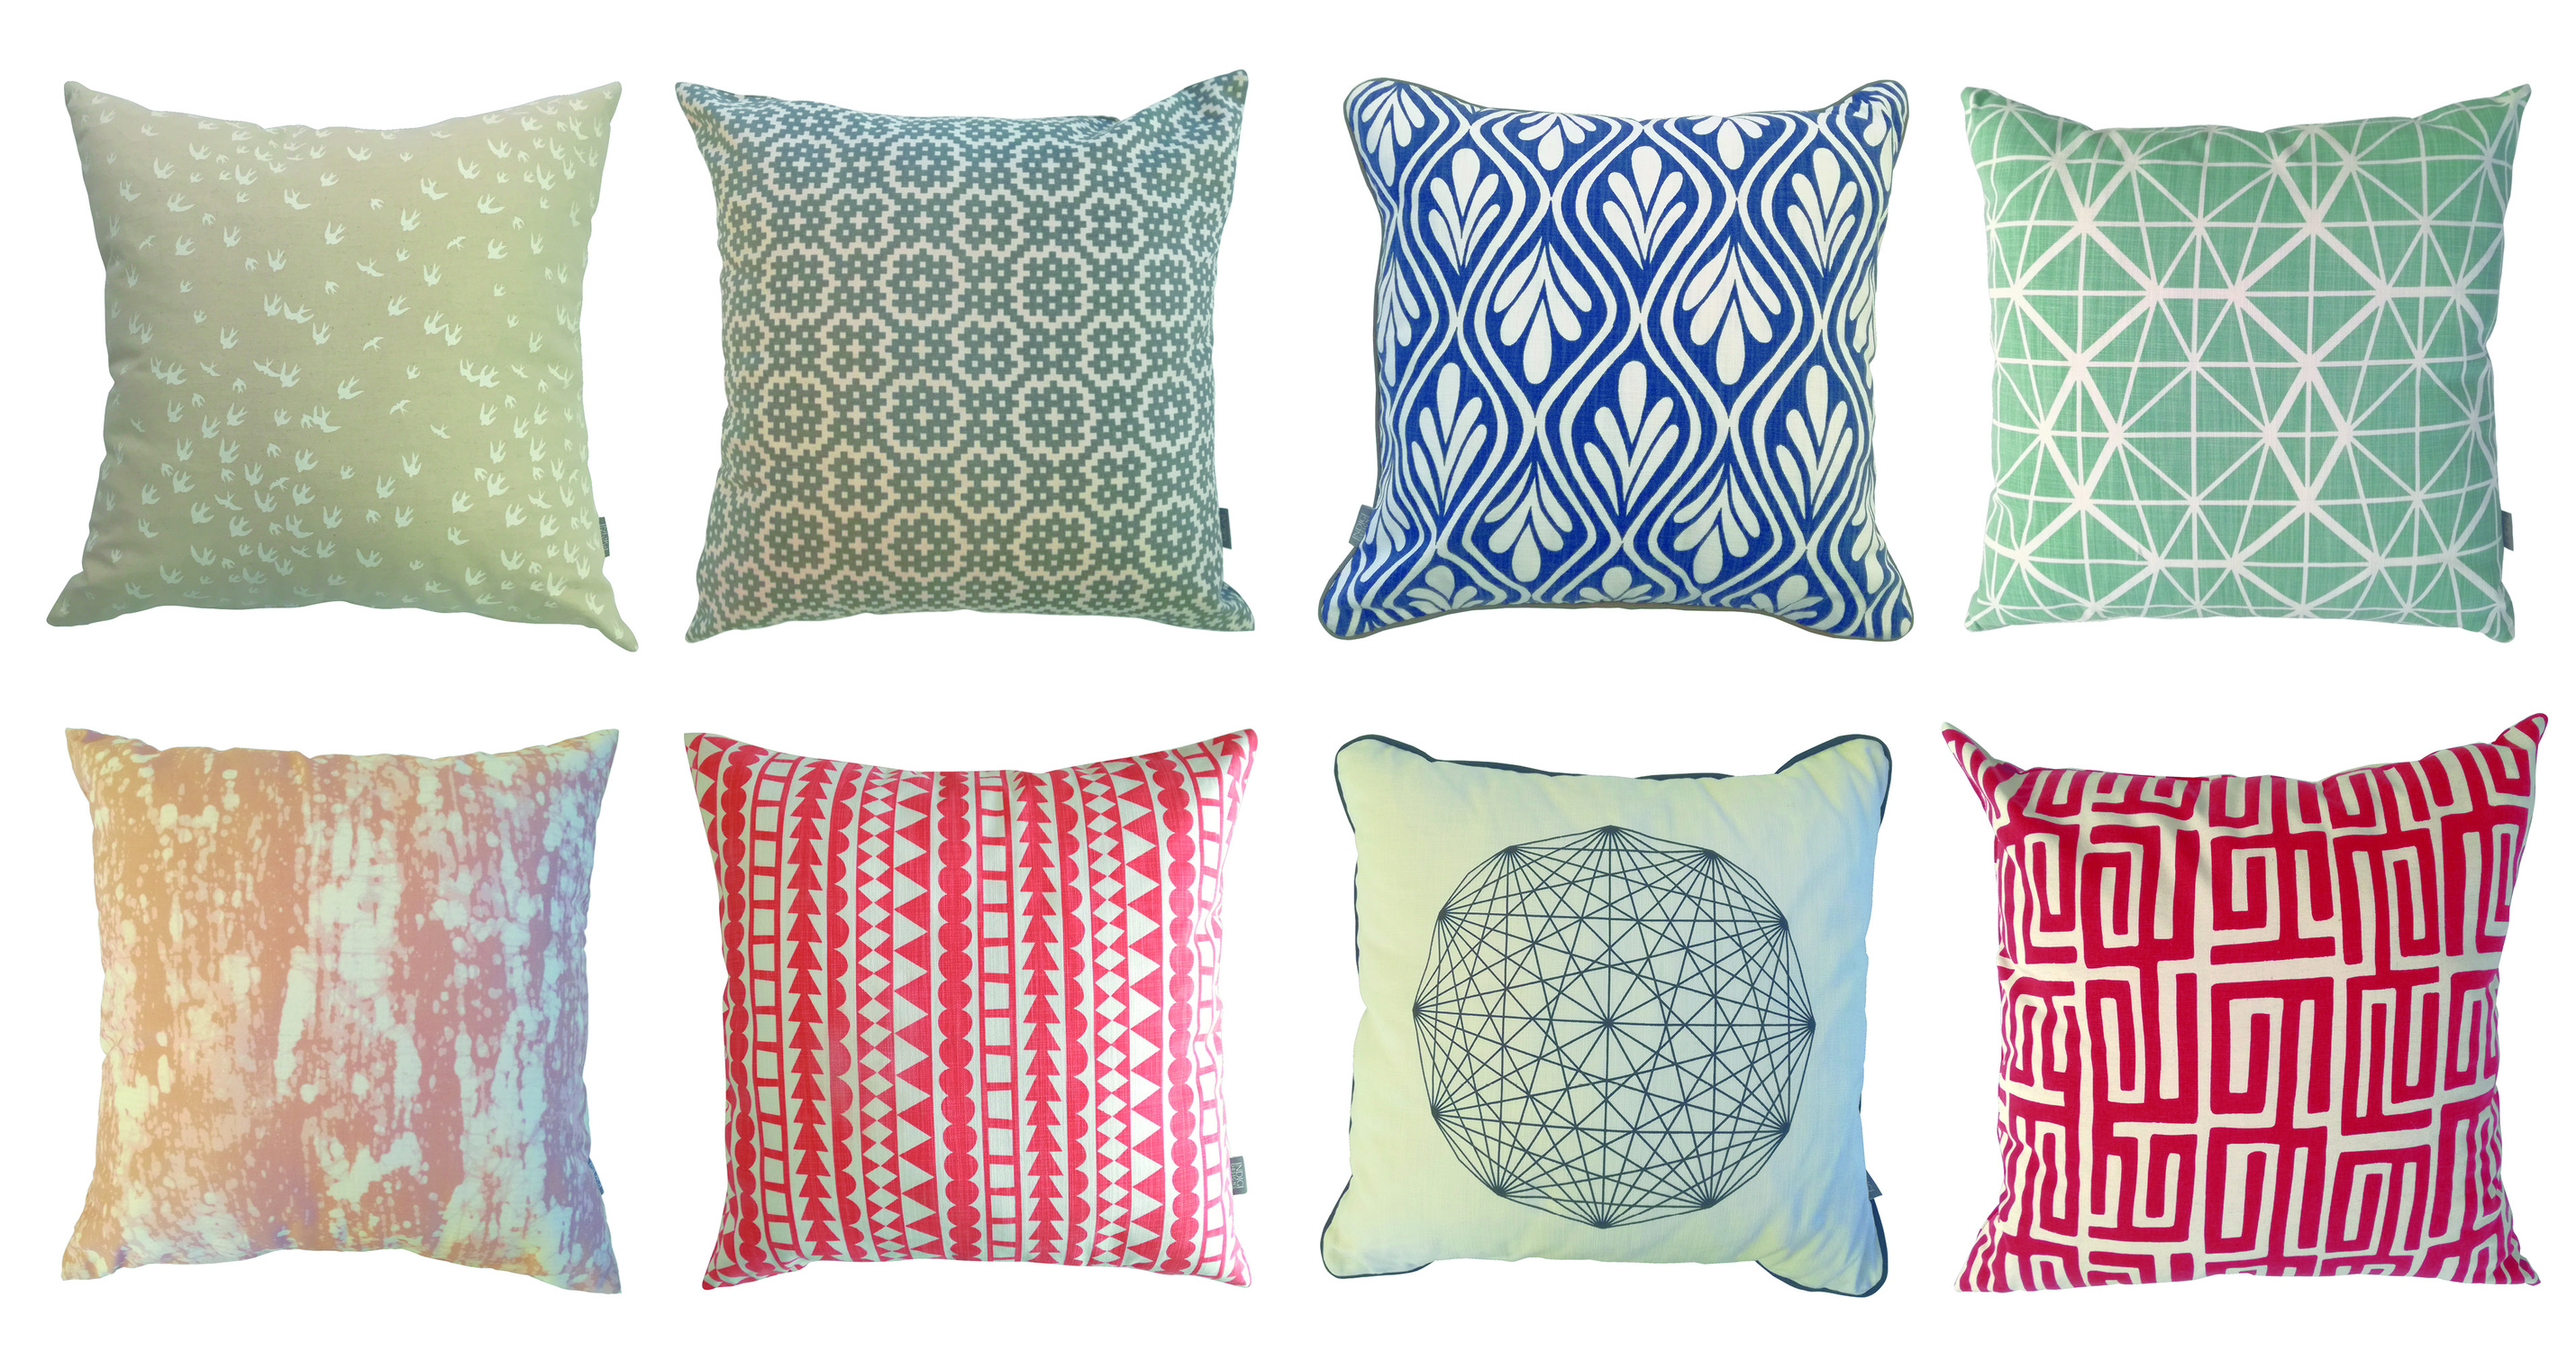 Indigi Designs Cushion Covers – Linking Maker and Market